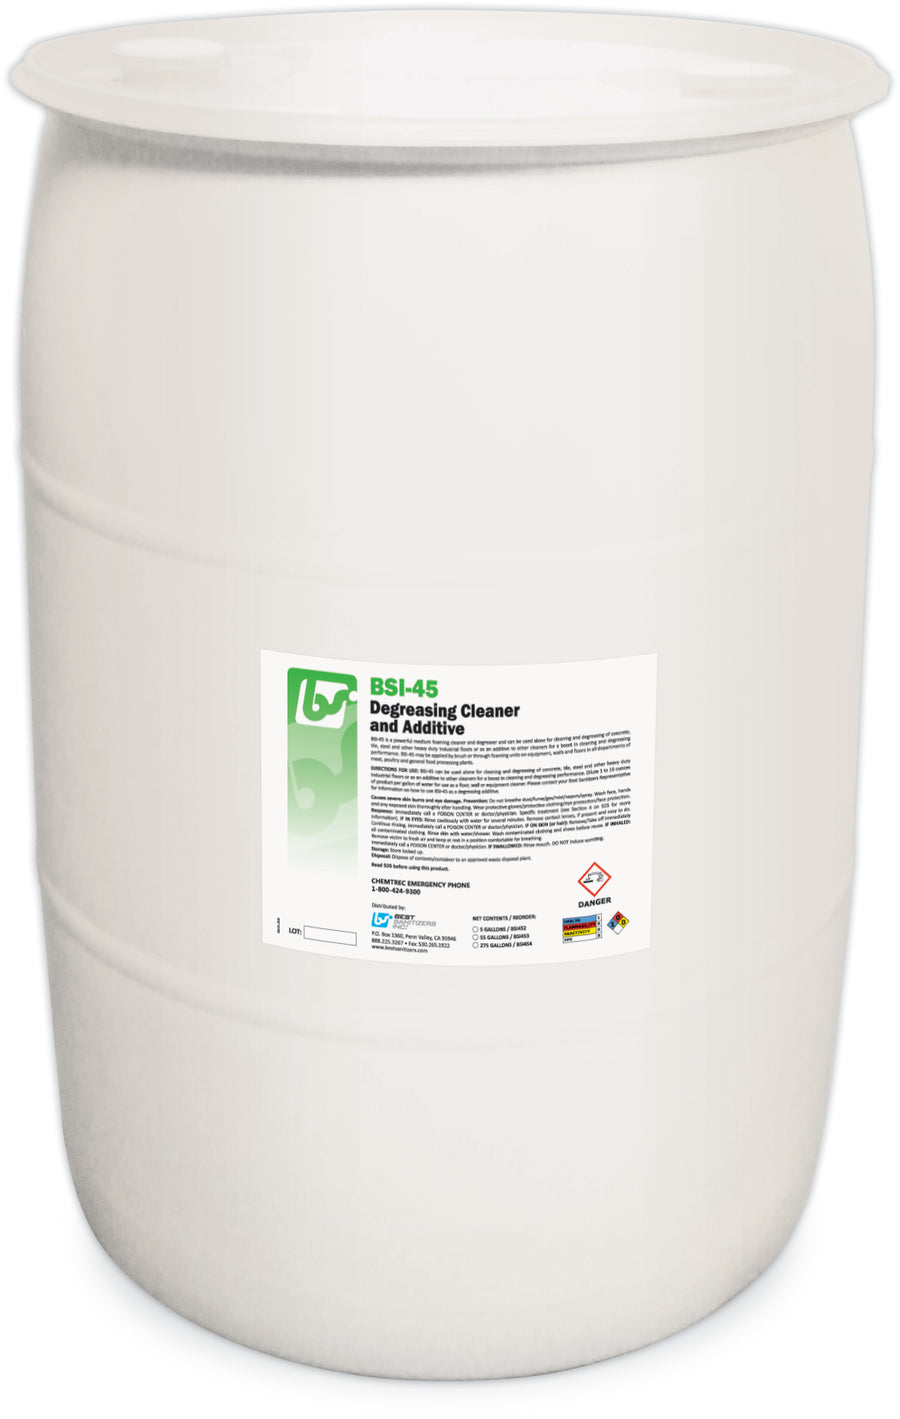 BSI-45 Degreasing Cleaner and Additive 55 Gallon Drum - Powerful Industrial Cleaning Solution